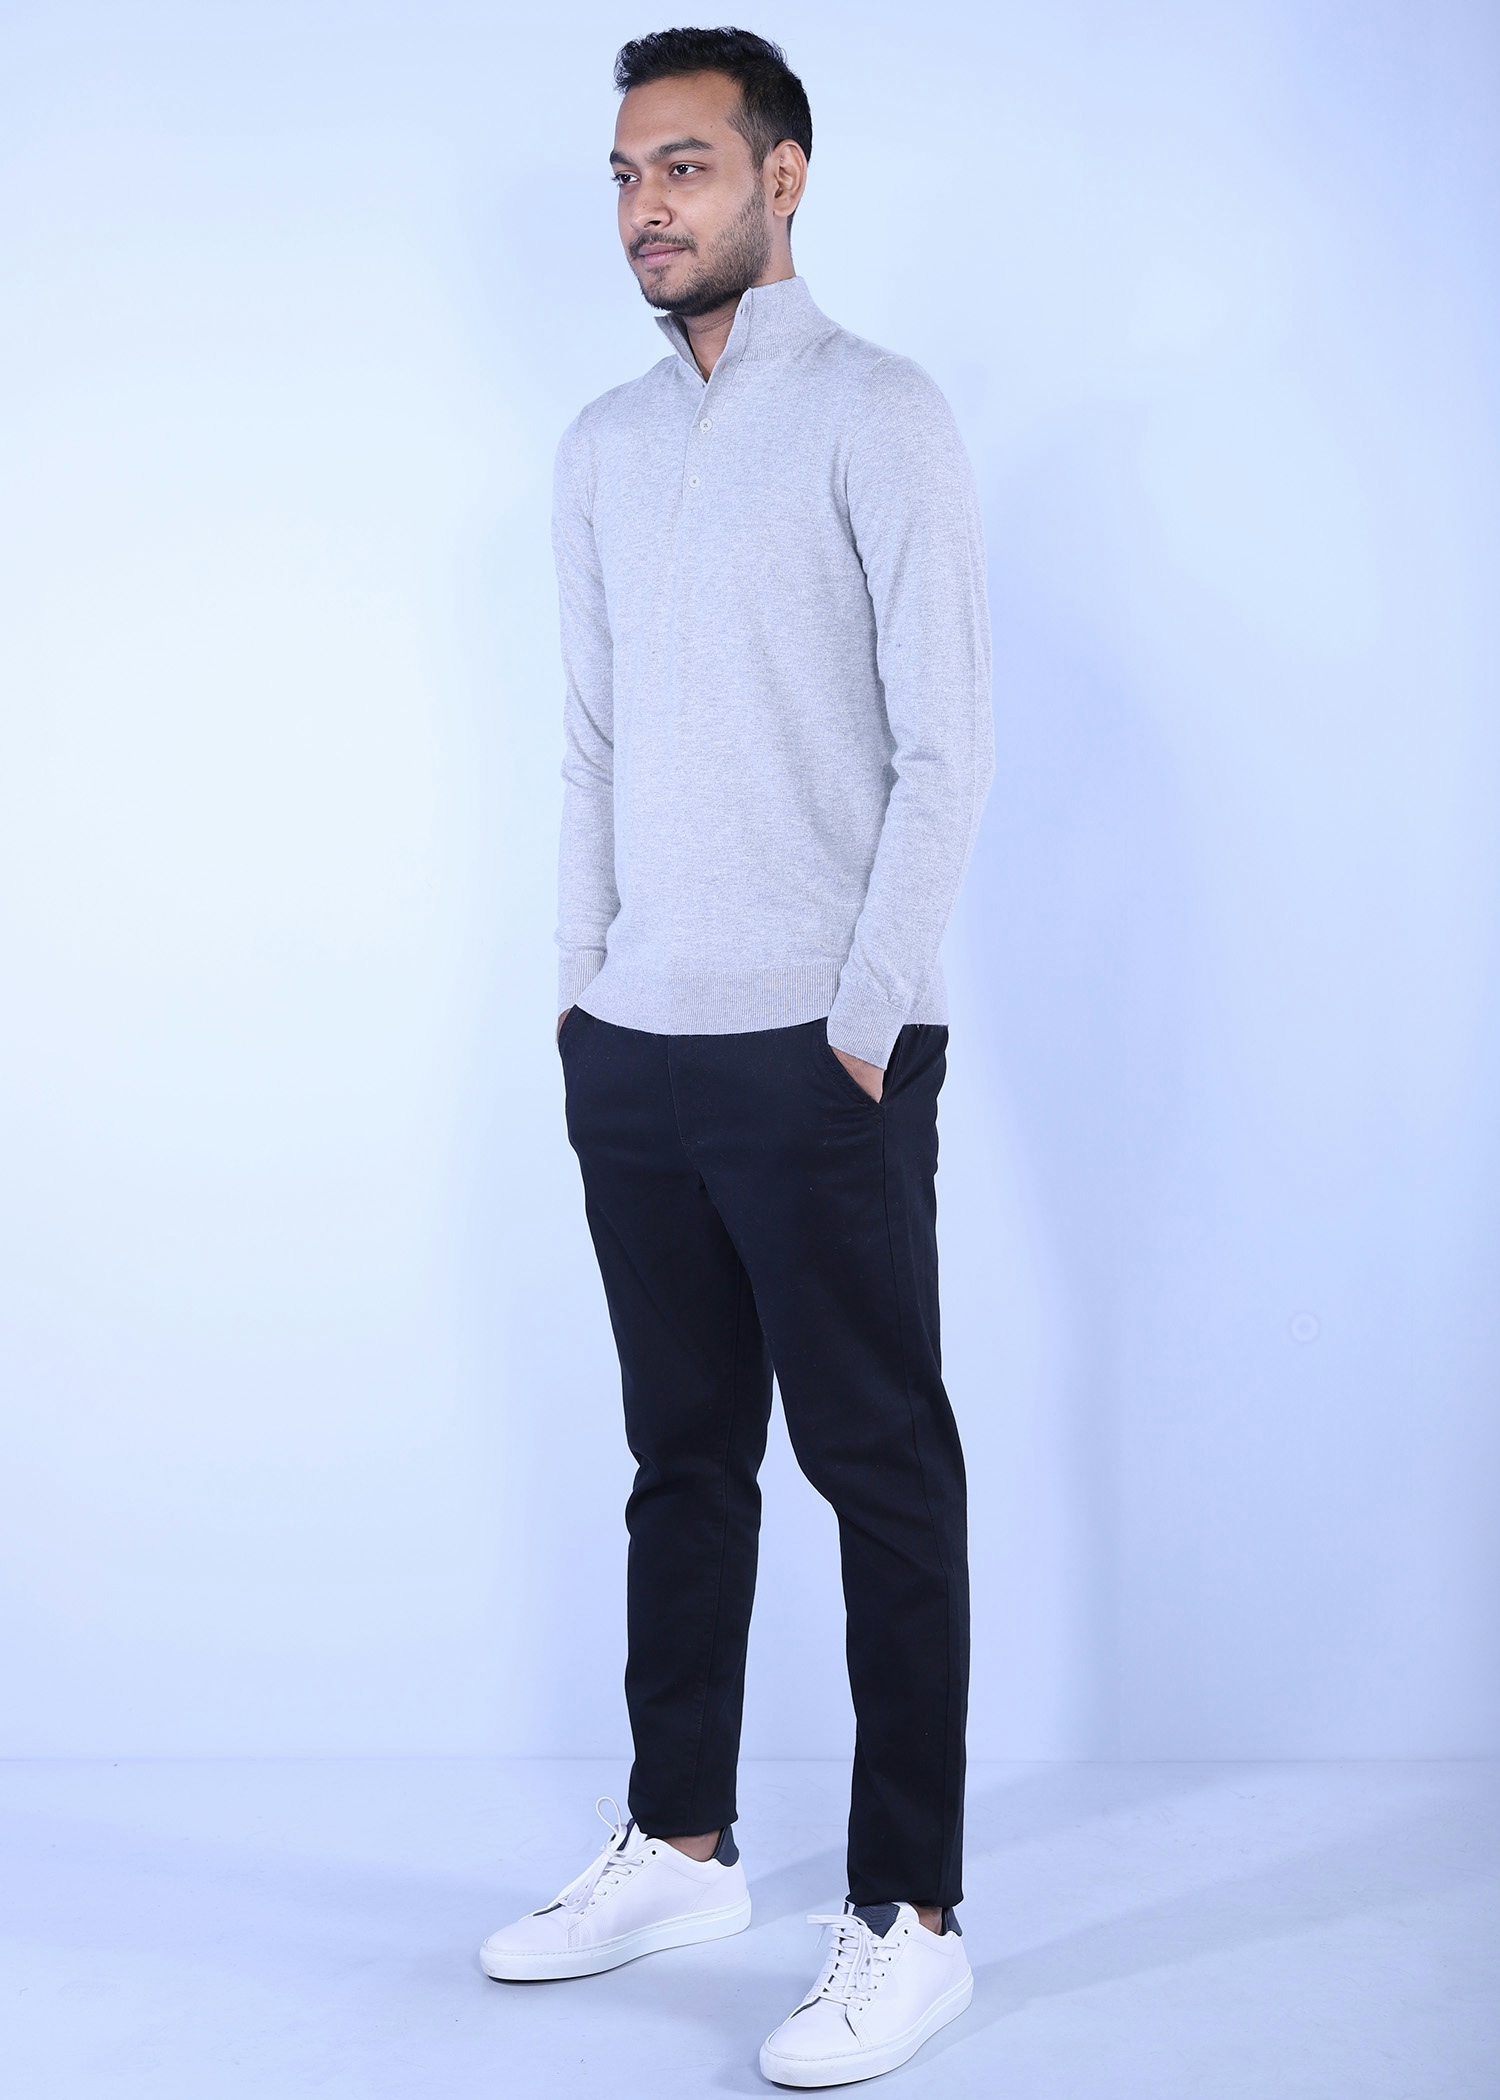 hornero i sweater grey color side view